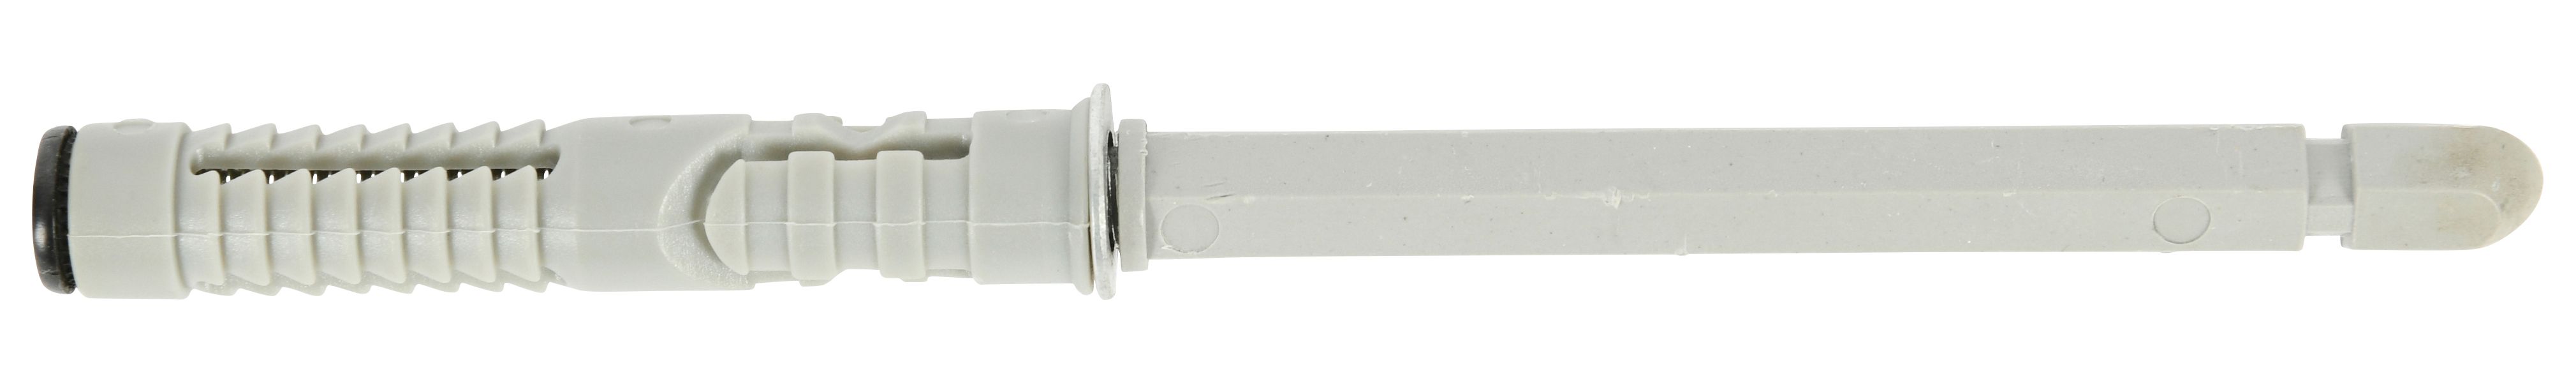 Image of Floating Shelf Supporting Bracket Pair - 140 x 14mm